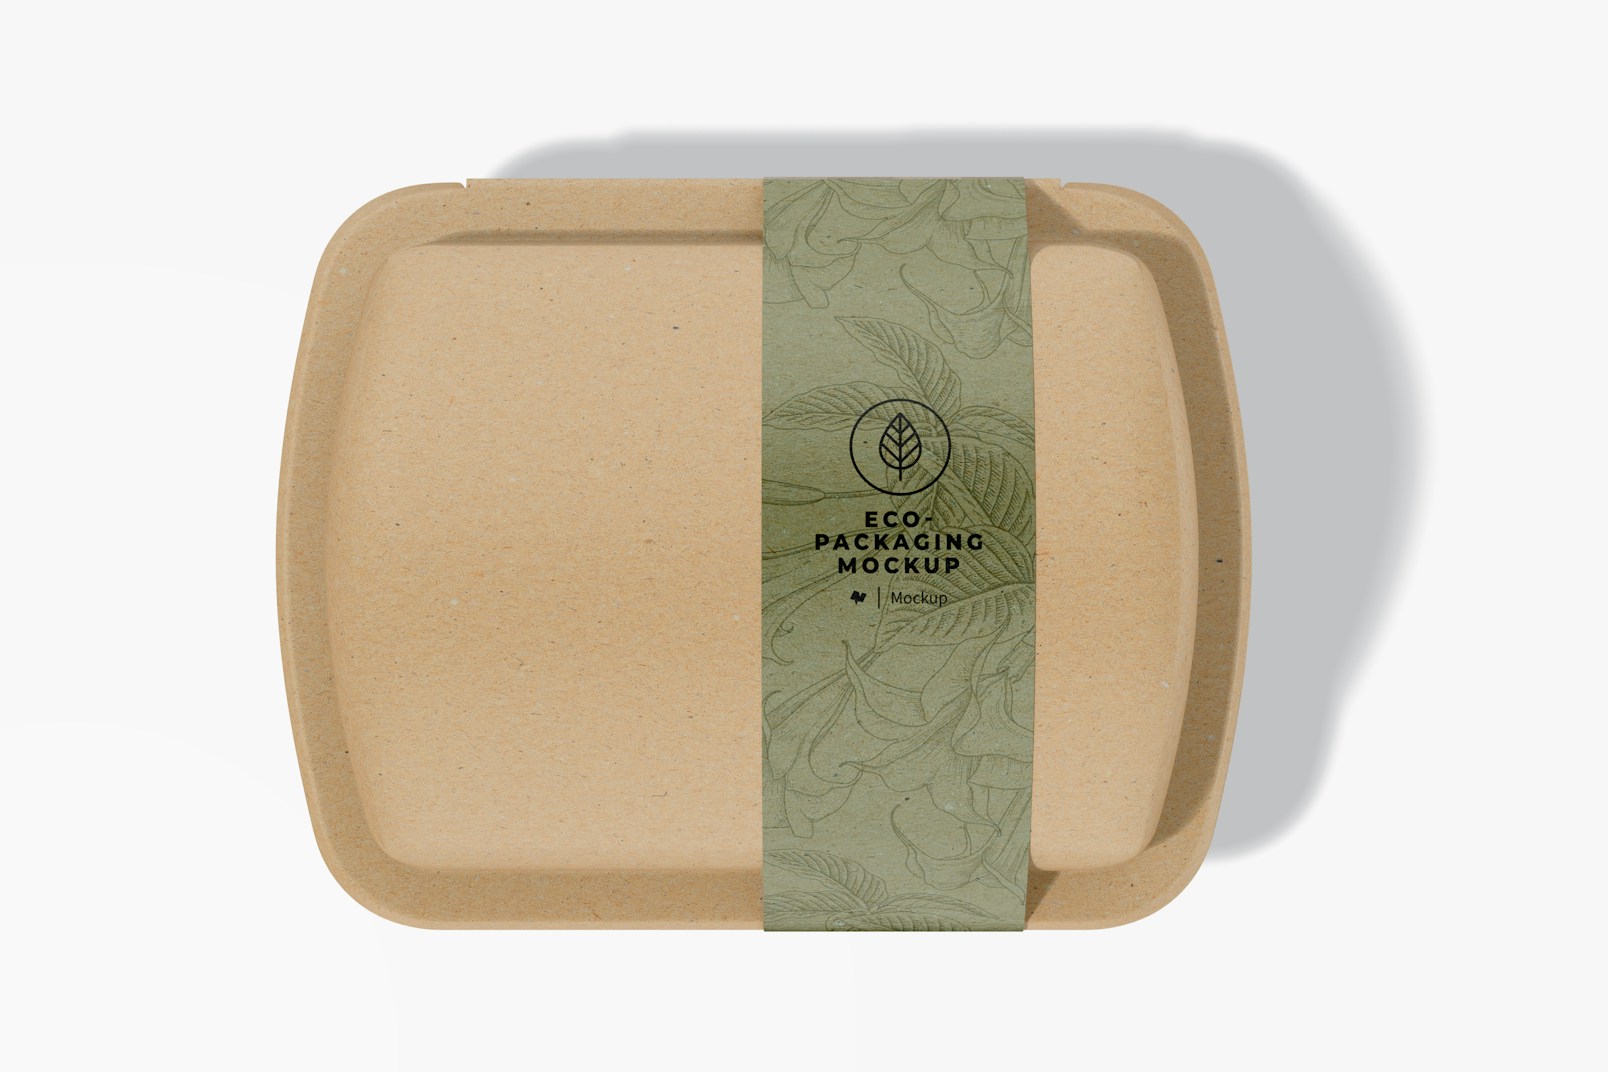 Small Biodegradable Food Packaging Mockup, Top View